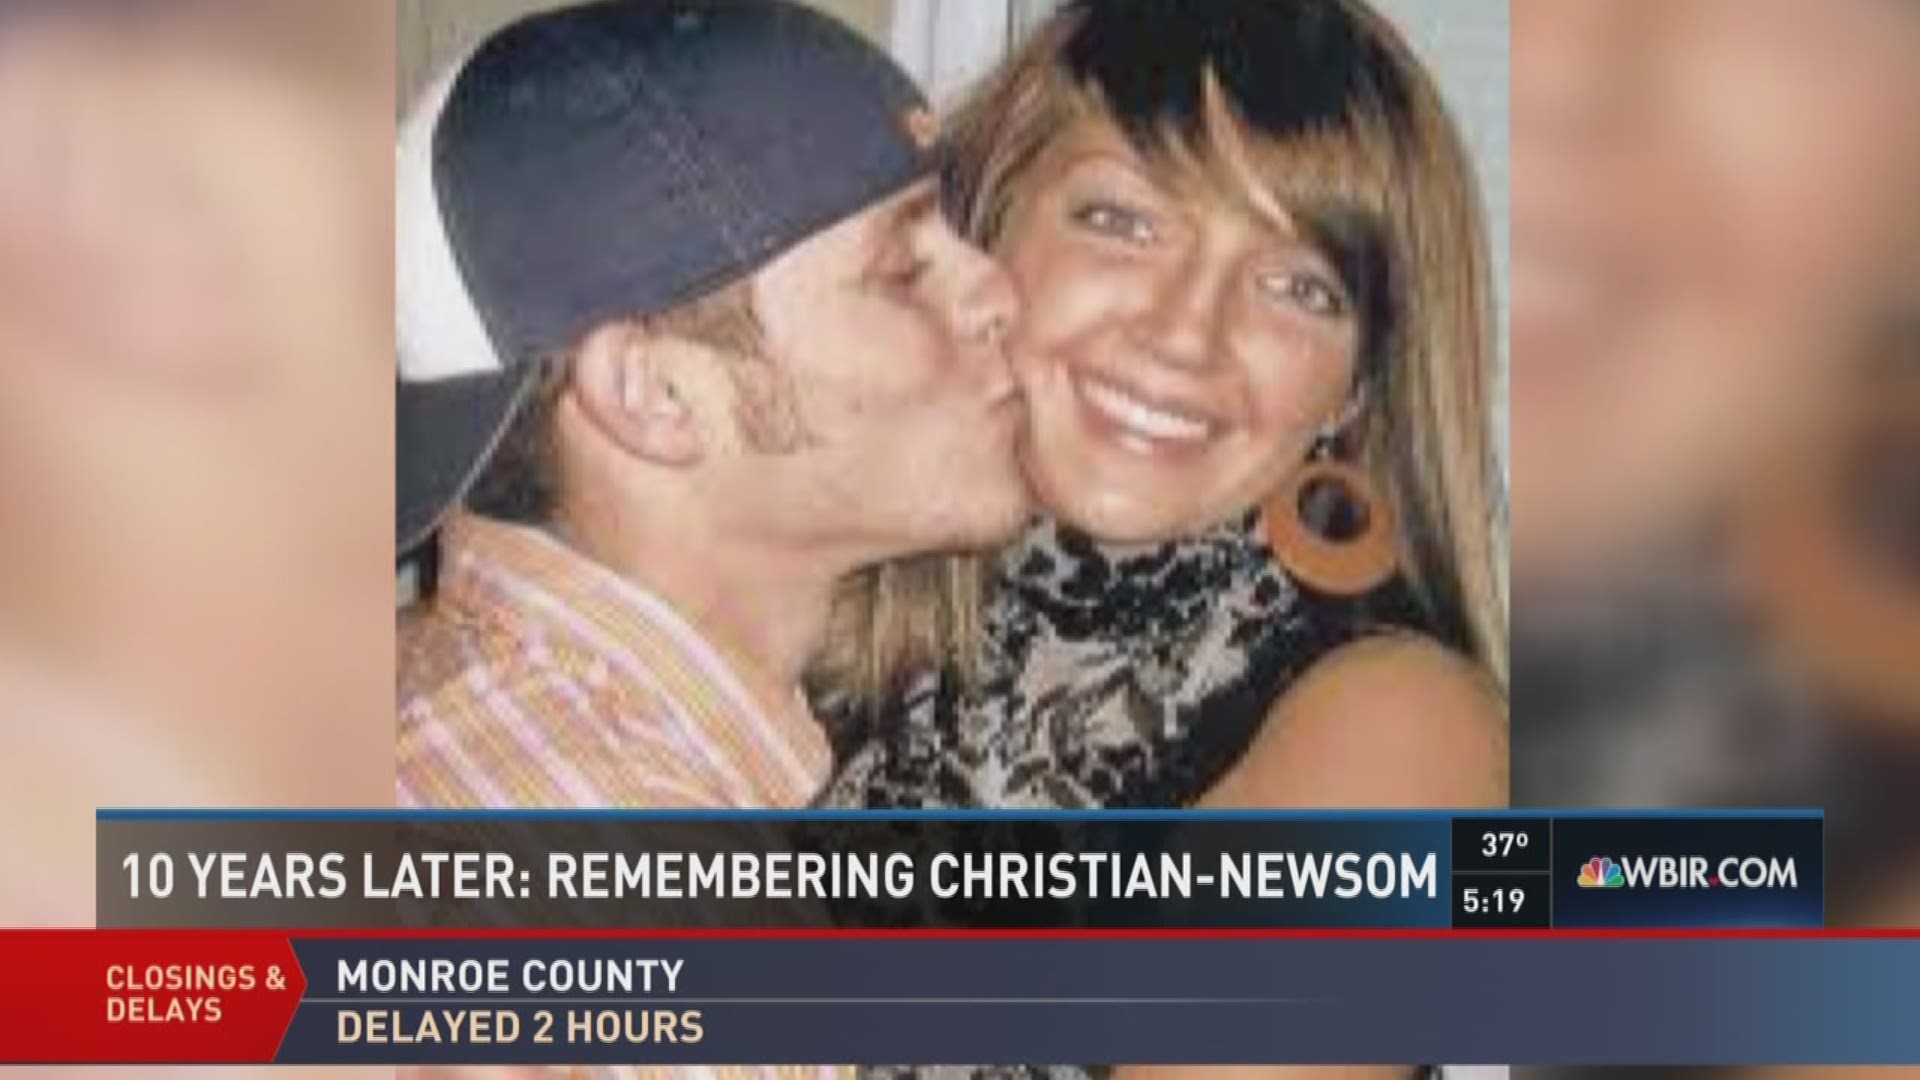 It's been 10 years since Channon Christian and Chris Newsom were brutally murdered. In the years since the young couple was killed, there have been numerous trials, memorials, and new laws.